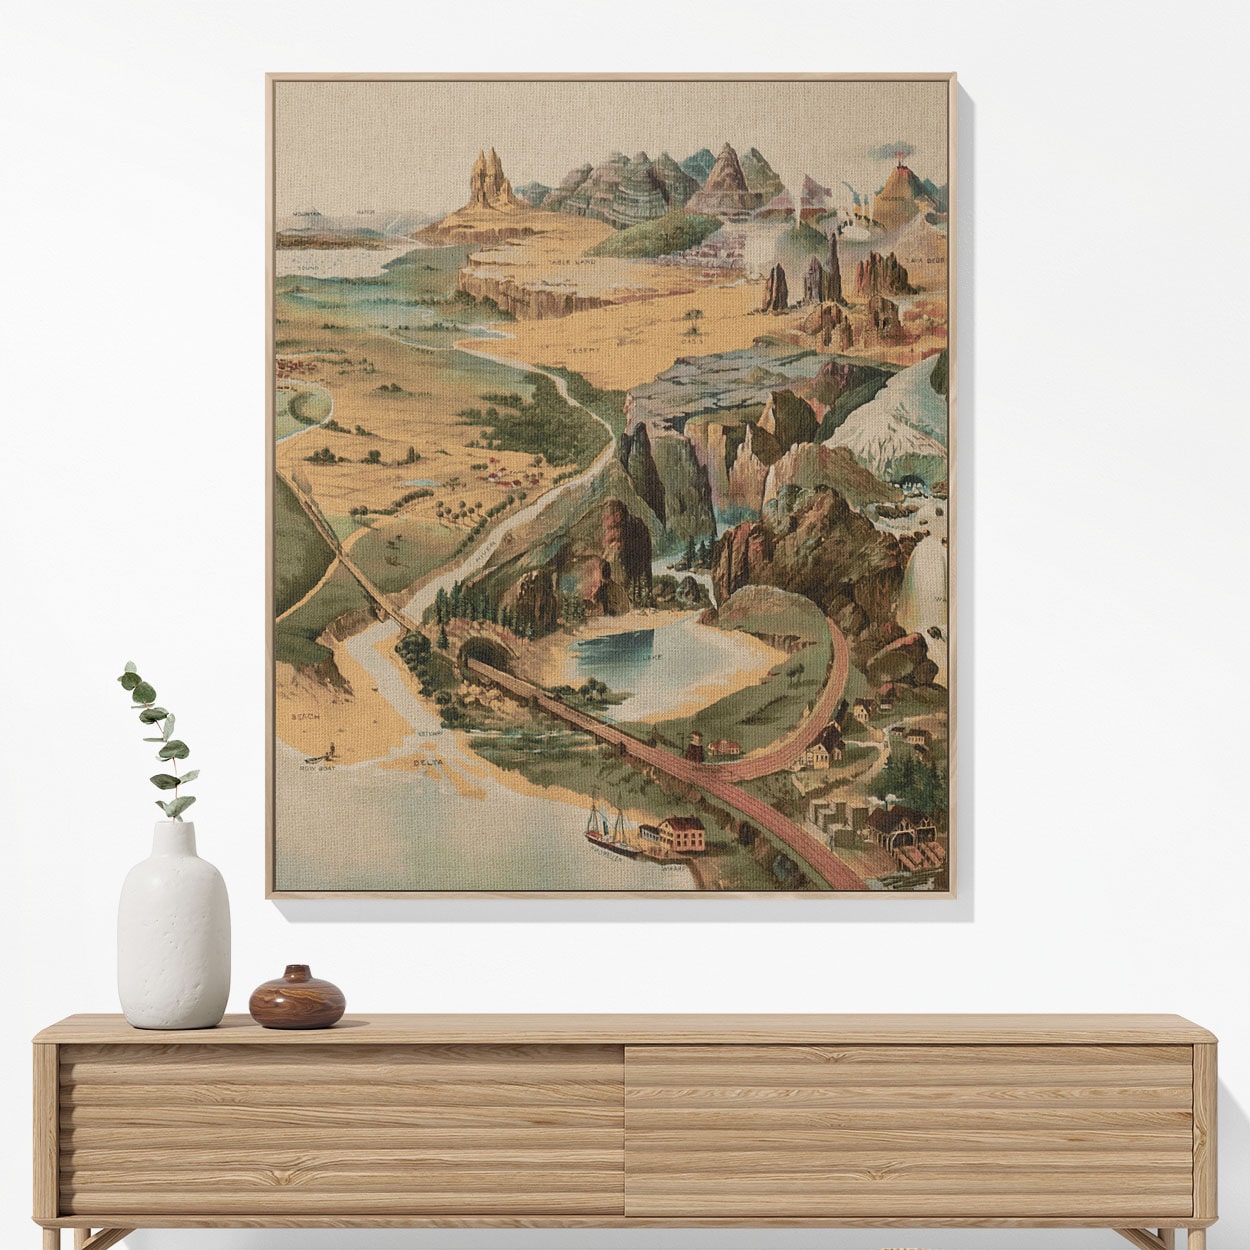 Cool Landscape Woven Blanket Woven Blanket Hanging on a Wall as Framed Wall Art